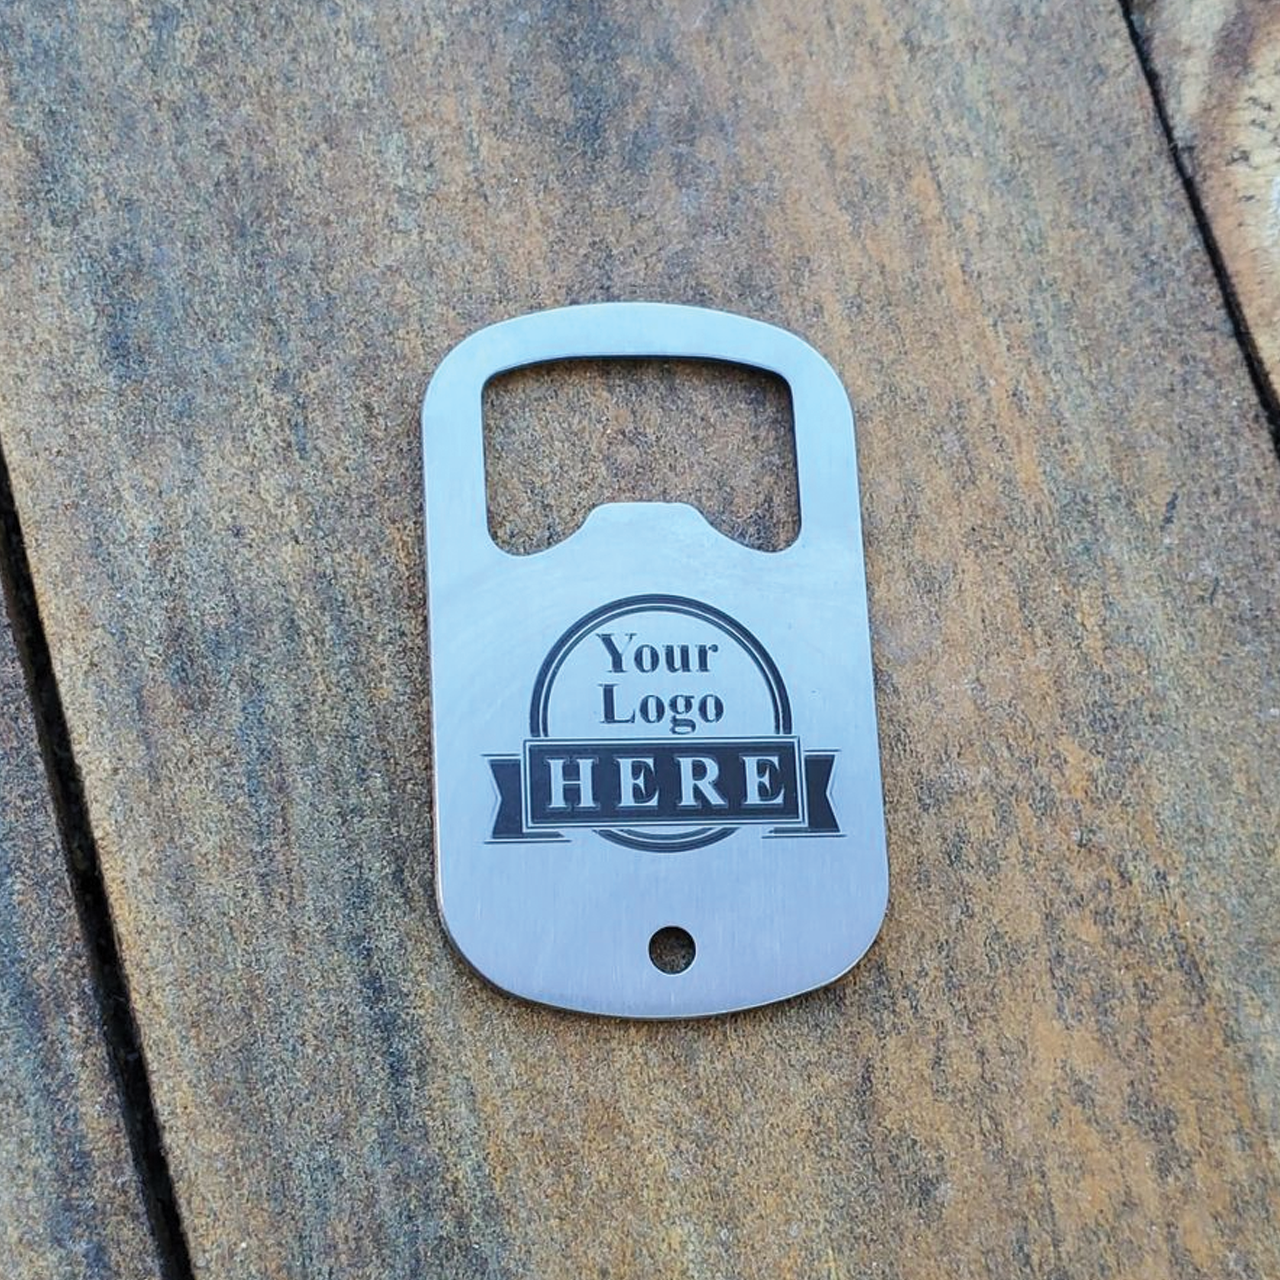 Personalized Minimalist Dog ID Bottle Opener Tag Business Keychain Stainless Steel Custom Laser Engraved Pocket Bottle Opener, Personalized, Minimalist, Bottle, Opener, Business, DogTag, Keychain, Stainless Steel, Custom, Laser Engraved, Pocket